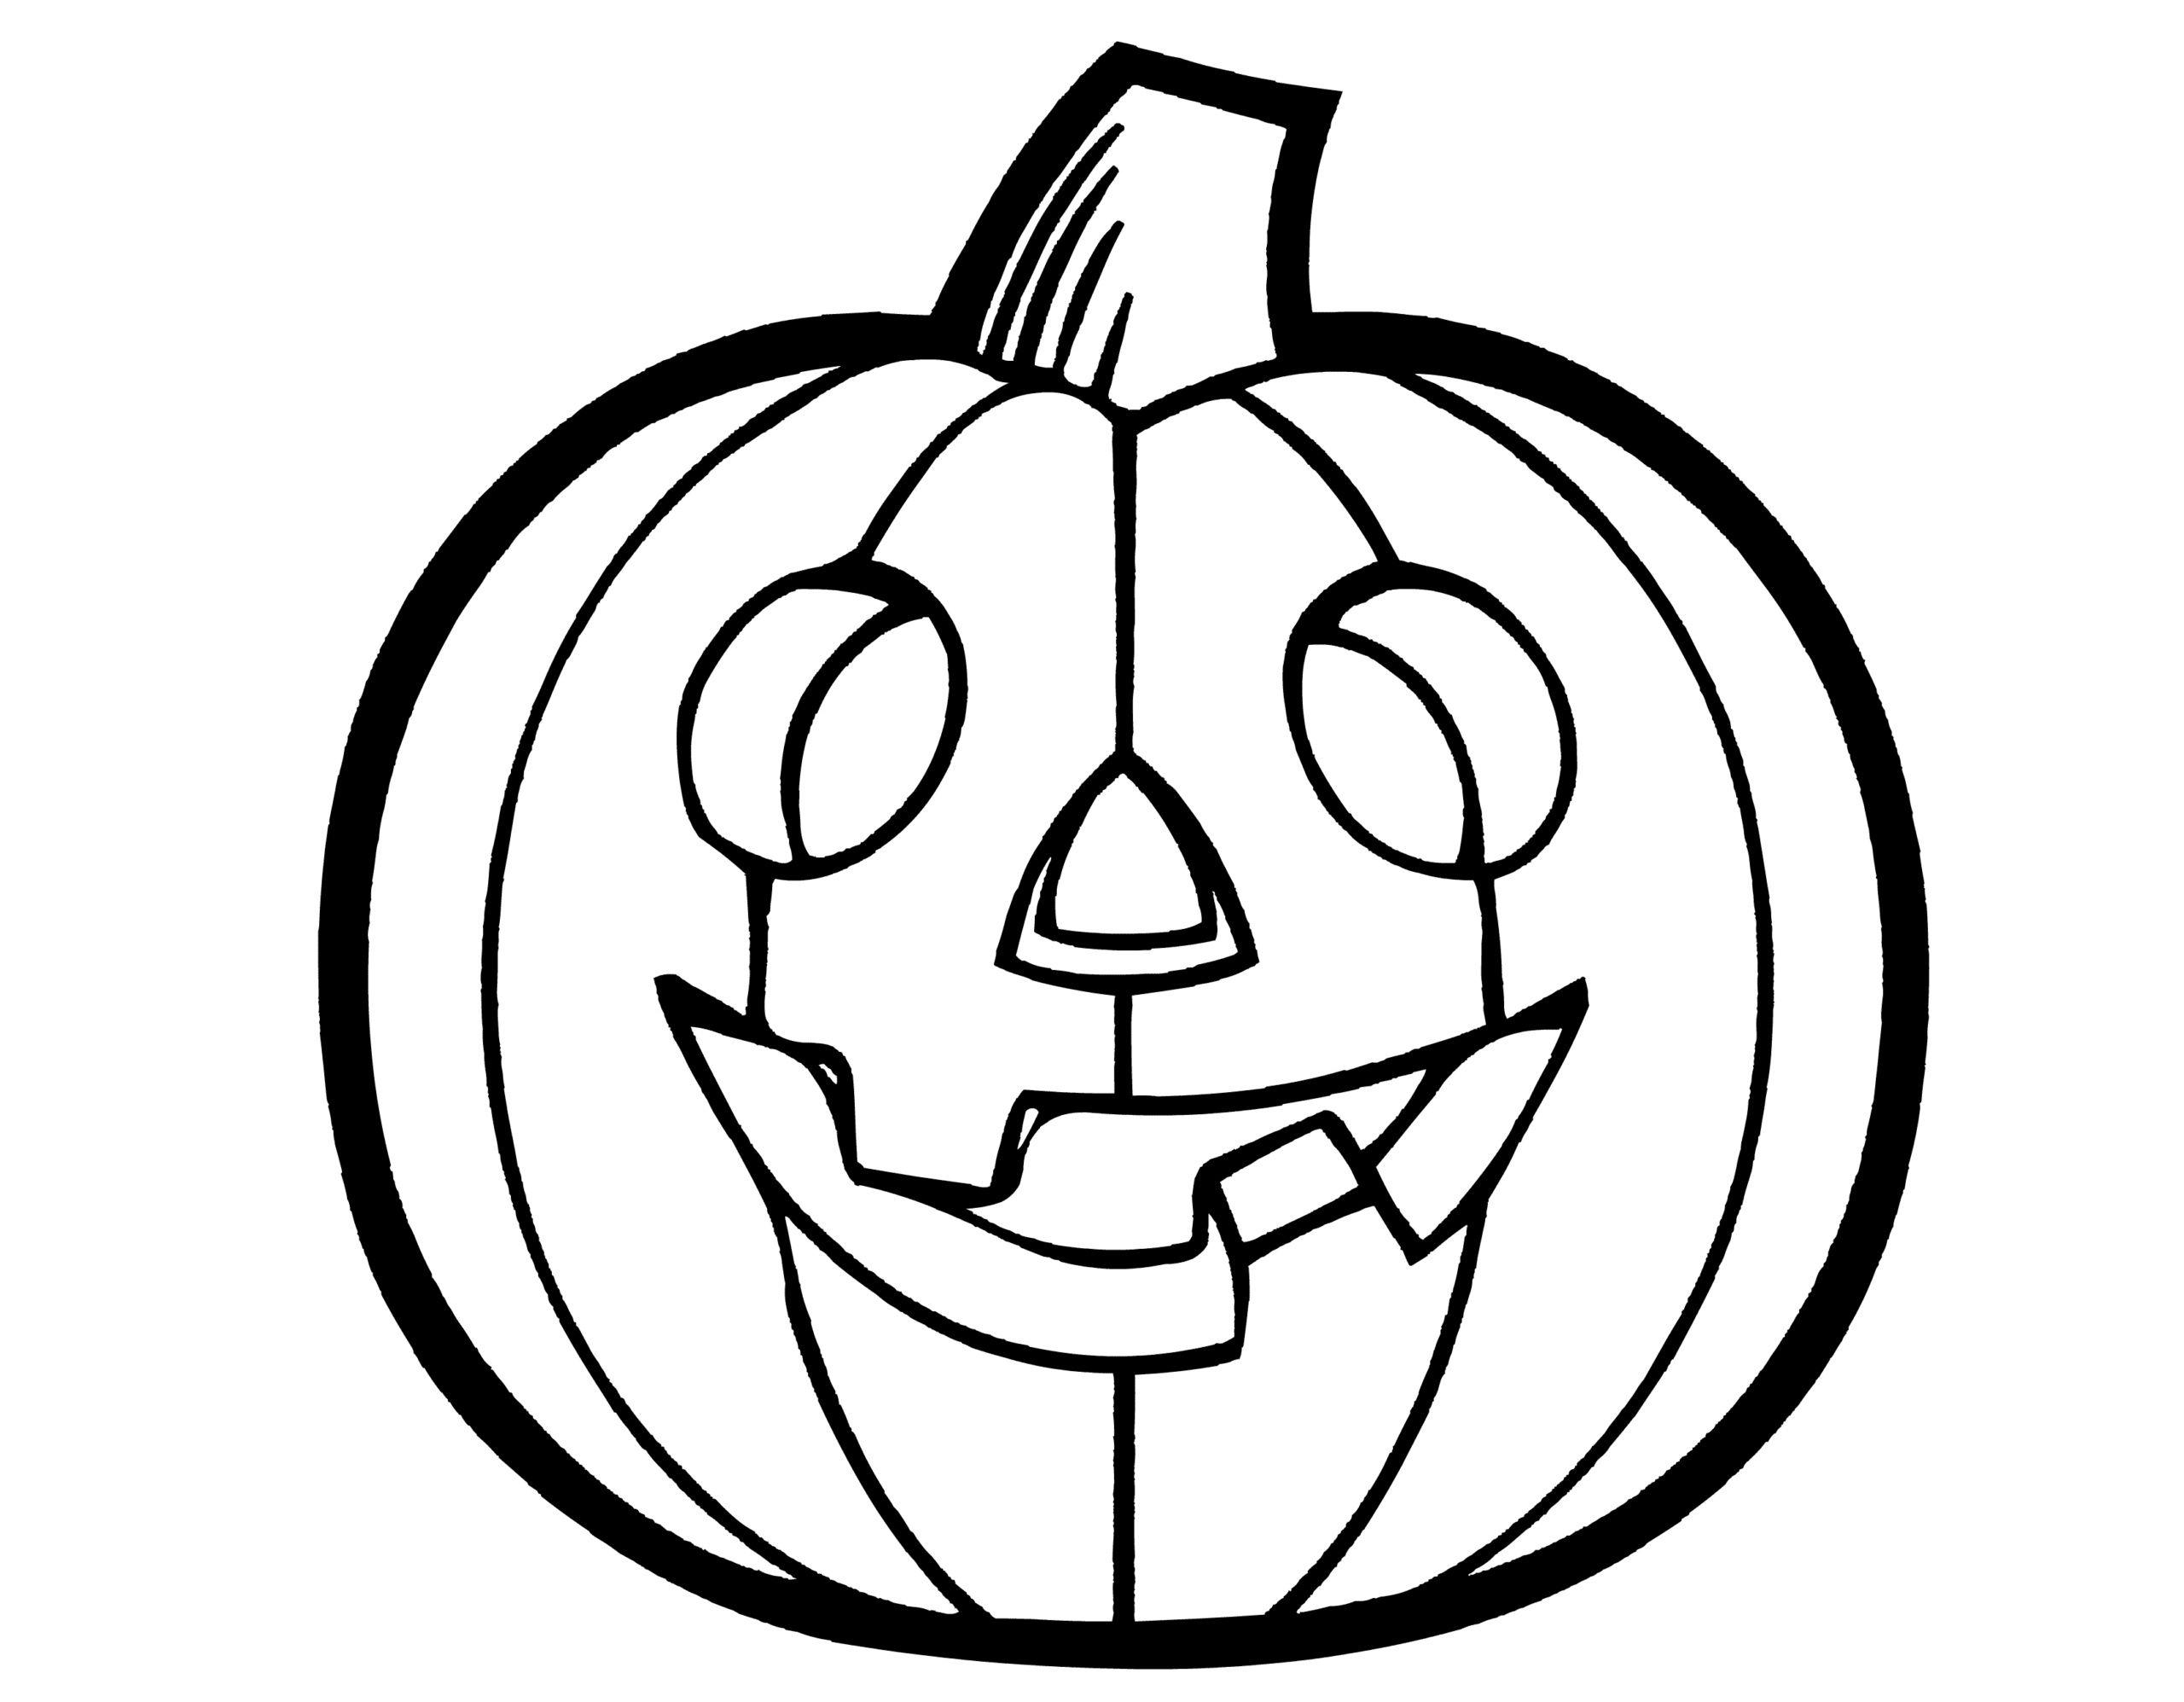 Scary Carved Halloween Pumpkin Coloring Pages for Kids